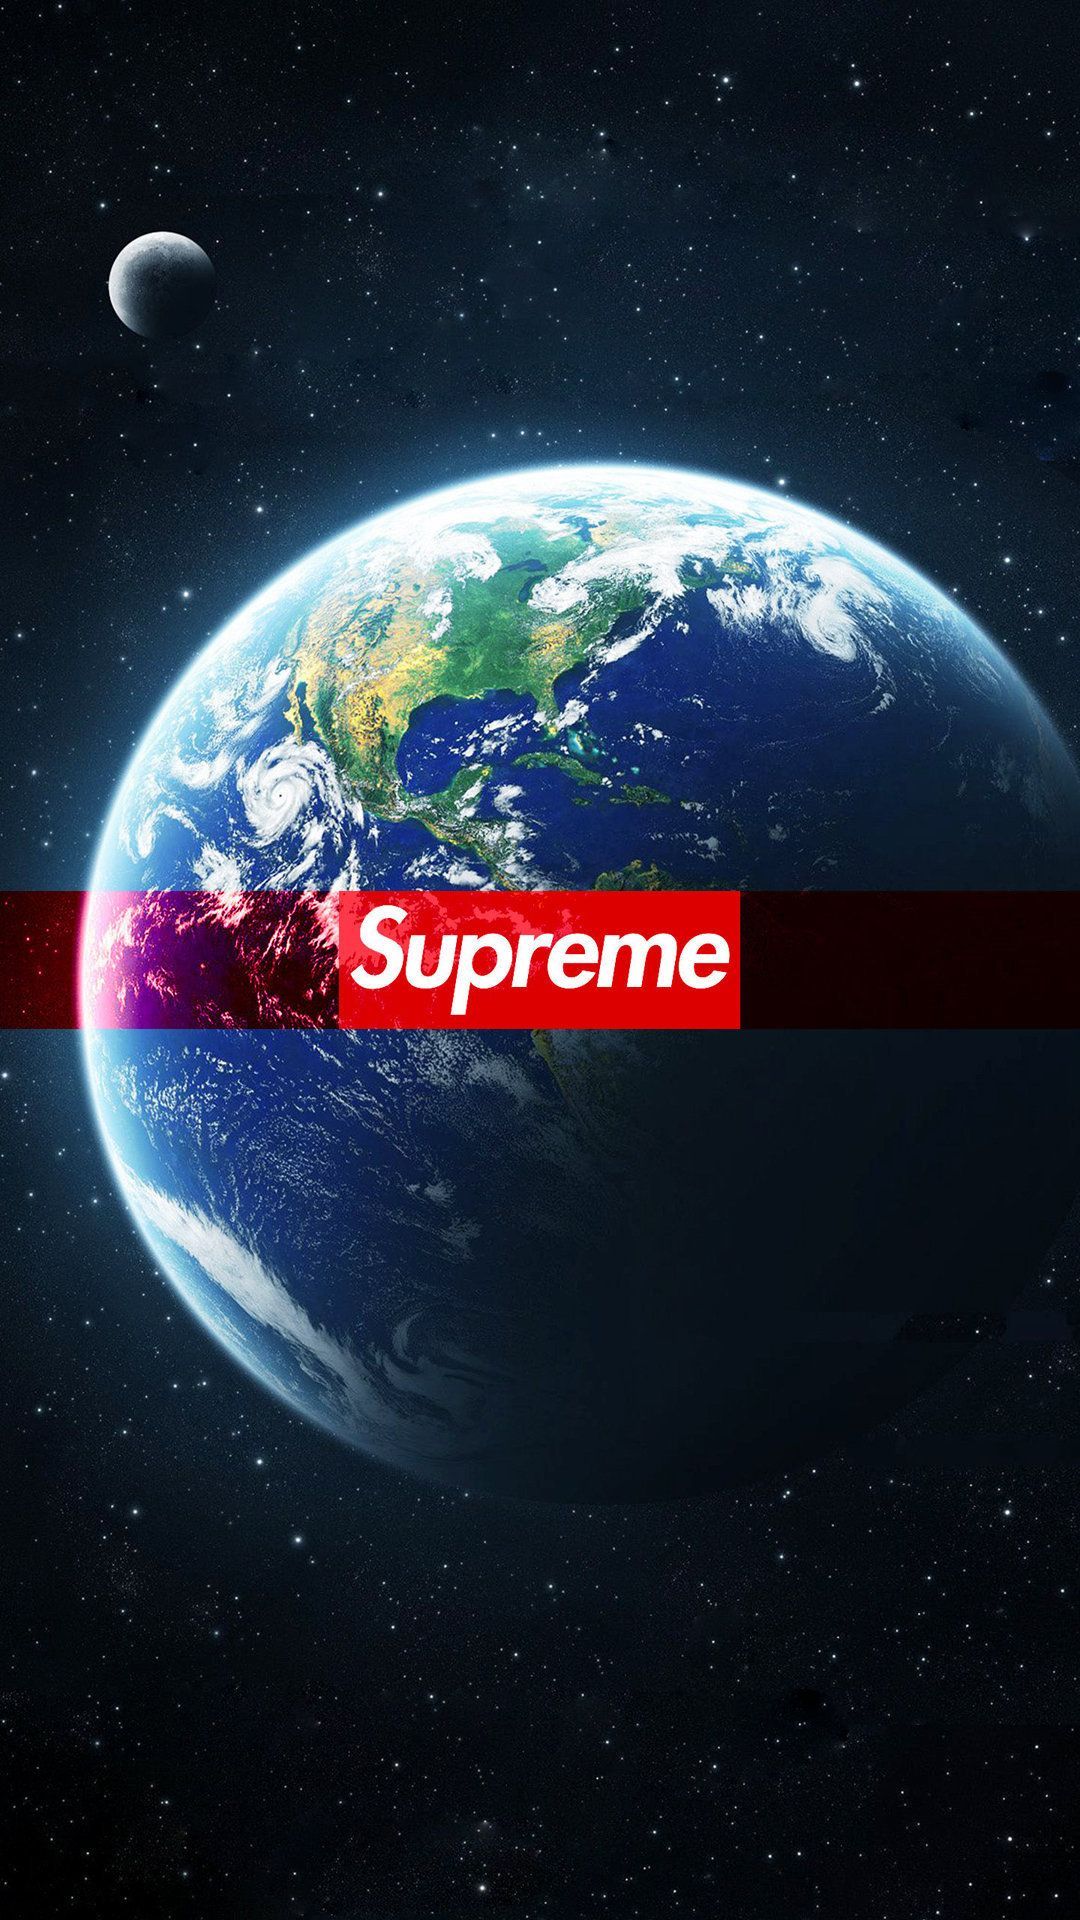 Supreme wallpaper for iPhone and Android phone. - Earth